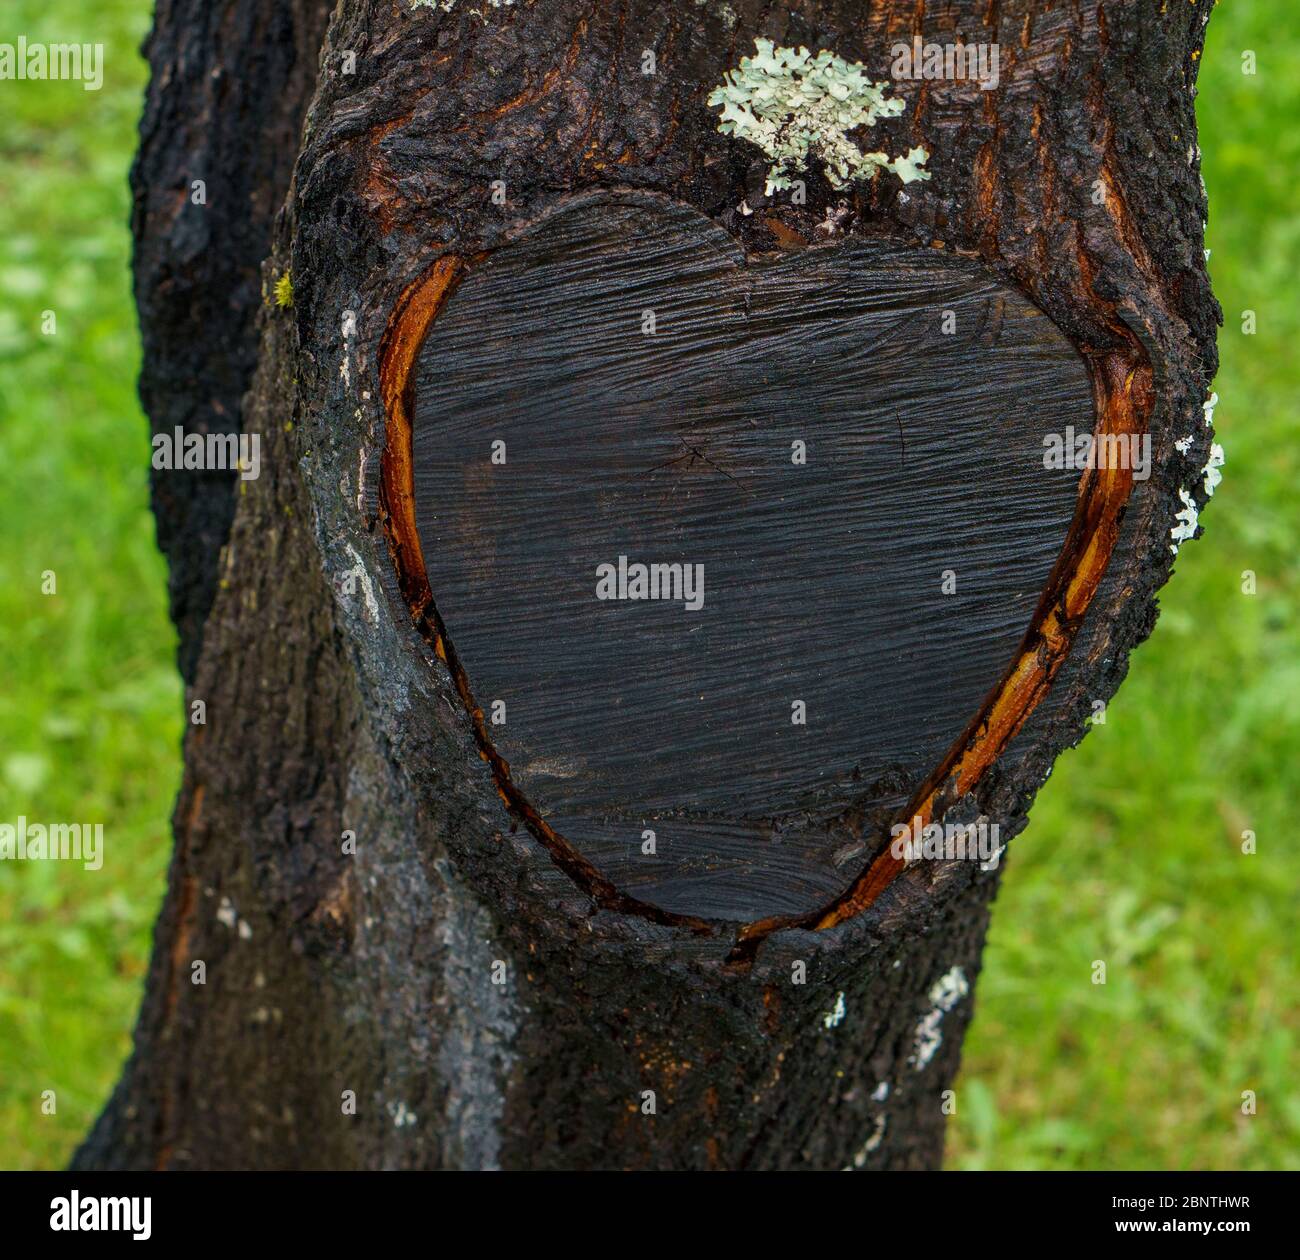 Black heart shaped mark on tree trunk after removed branch Stock Photo